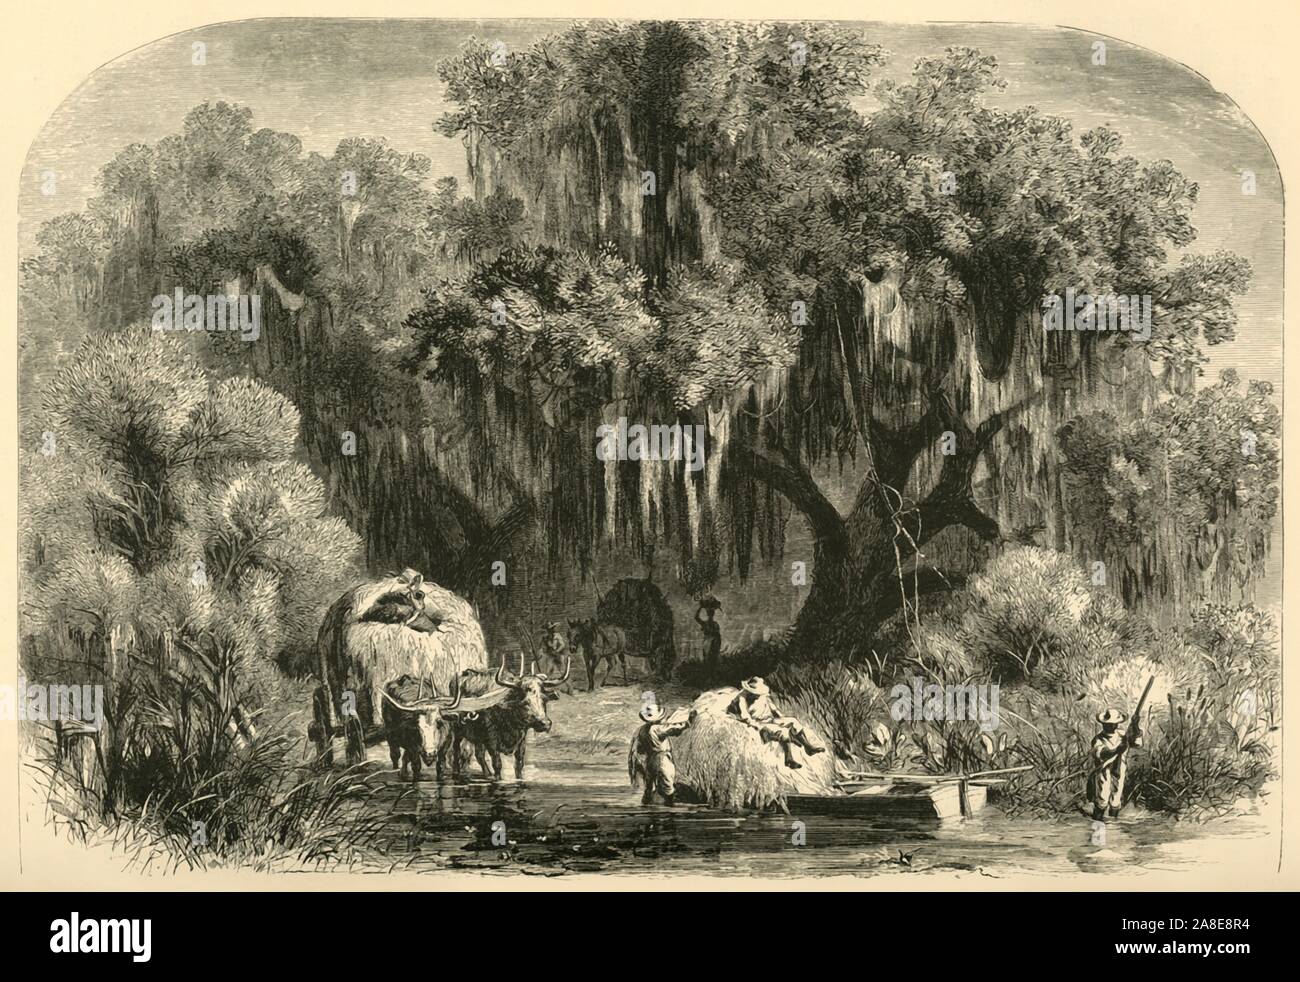 'The Moss-Gatherers', 1872. People collecting Spanish moss in the southern USA. '...Spanish moss has become important as an article of commerce, for, when plucked from the trees, from which it is easily separated, and then thoroughly &quot;cured&quot; and threshed of its delicate integuments of bark and leaves, it is found that through the long, thready moss is a delicate fibre as black as jet, and almost as thick as horsehair, which it strikingly resembles. For the stuffing of mattresses and cushions it is valuable, and the increasing demand for it has already opened a new field of enterprise Stock Photo